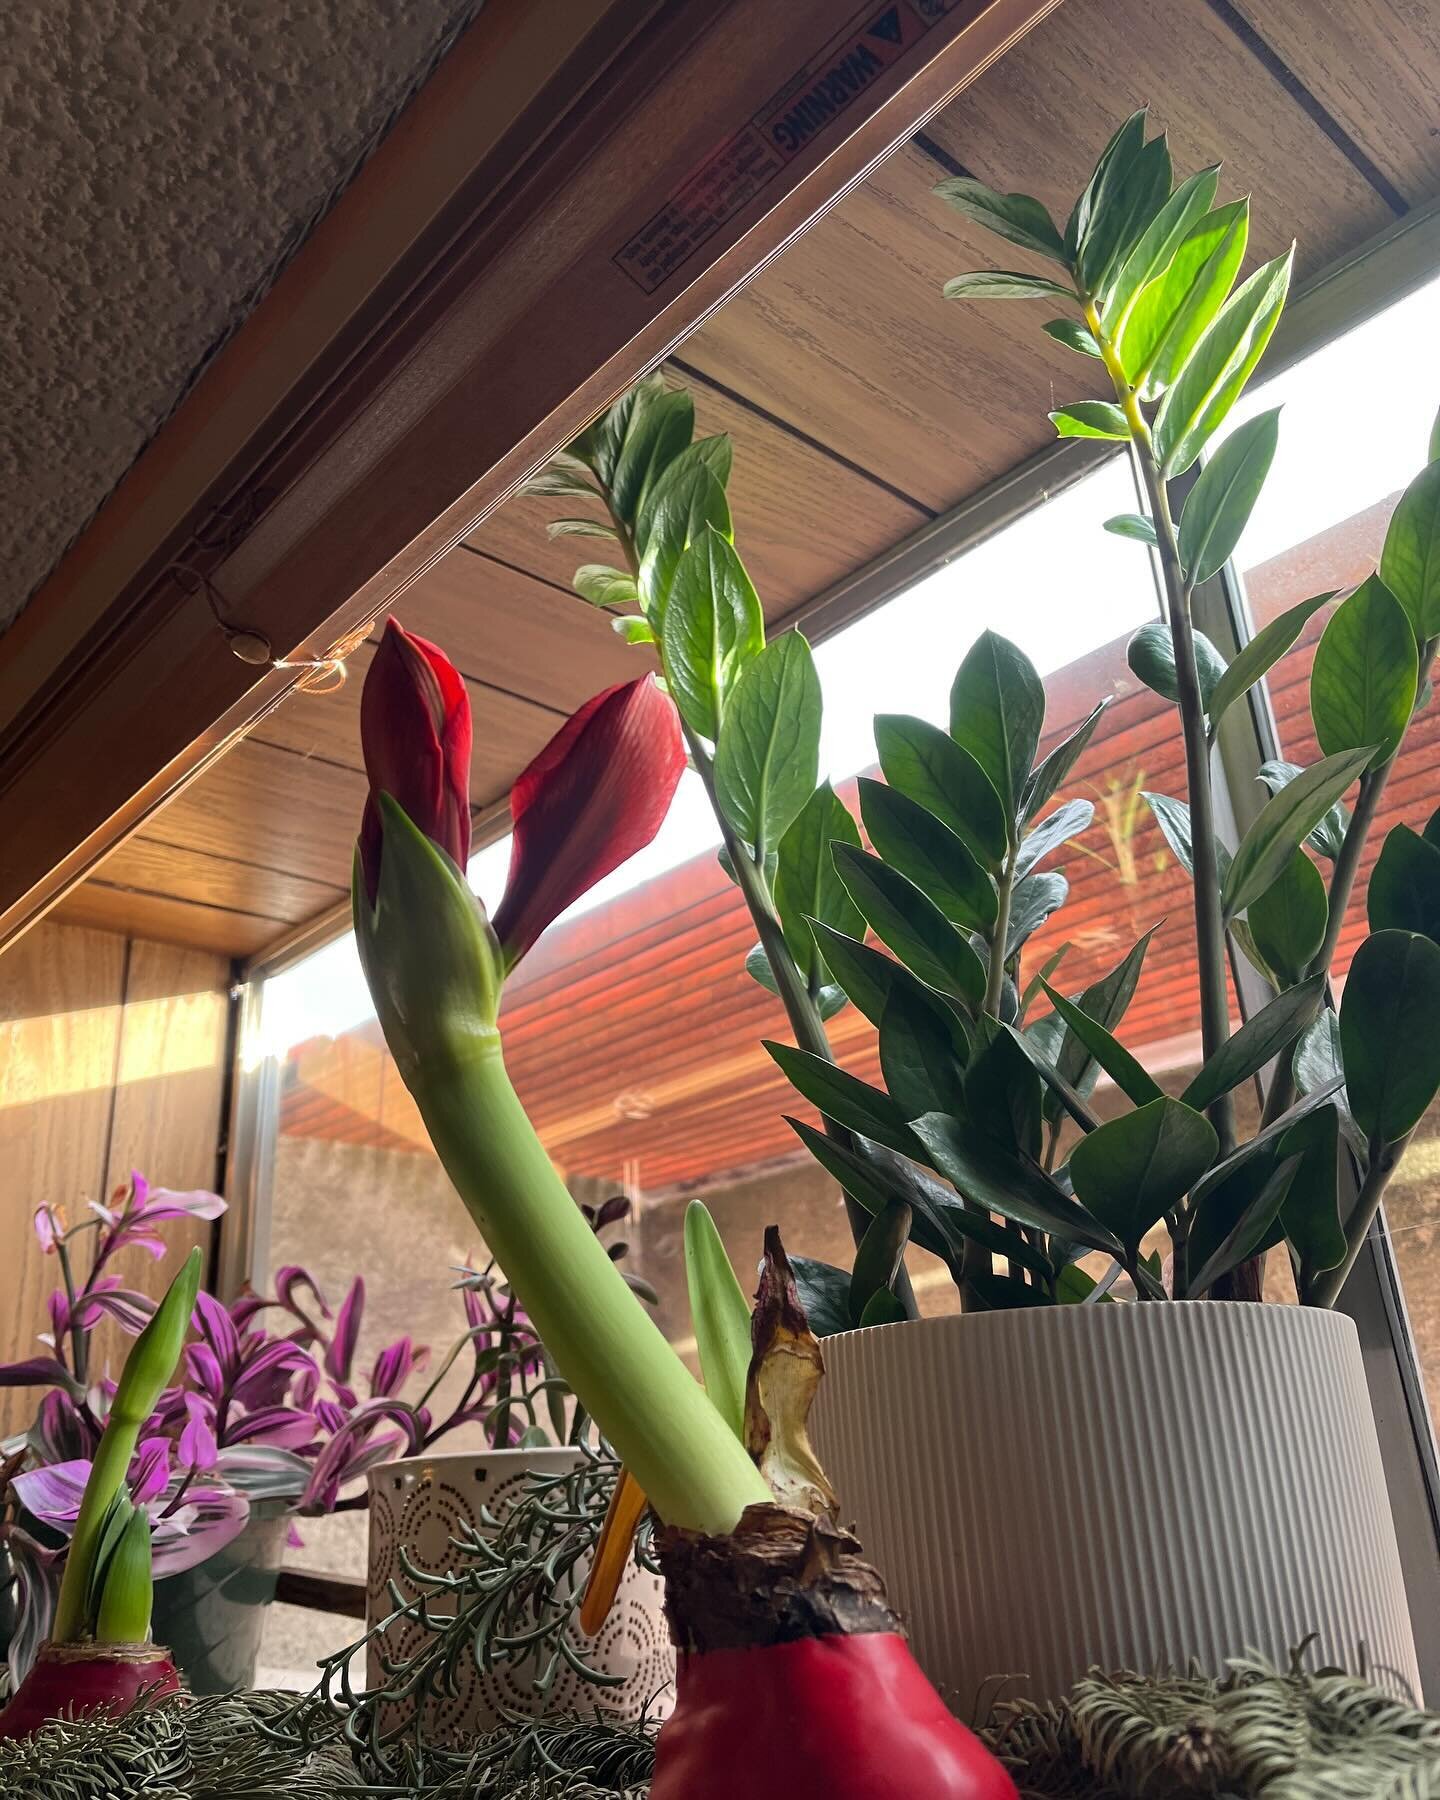 Such a sweet surprise today! I made it into the clinic for one appointment this afternoon, first time in 7 days thanks to these ice storms! The amaryllis has bloomed in the meantime. 

I have room on my books next week and all the cozy additions to t